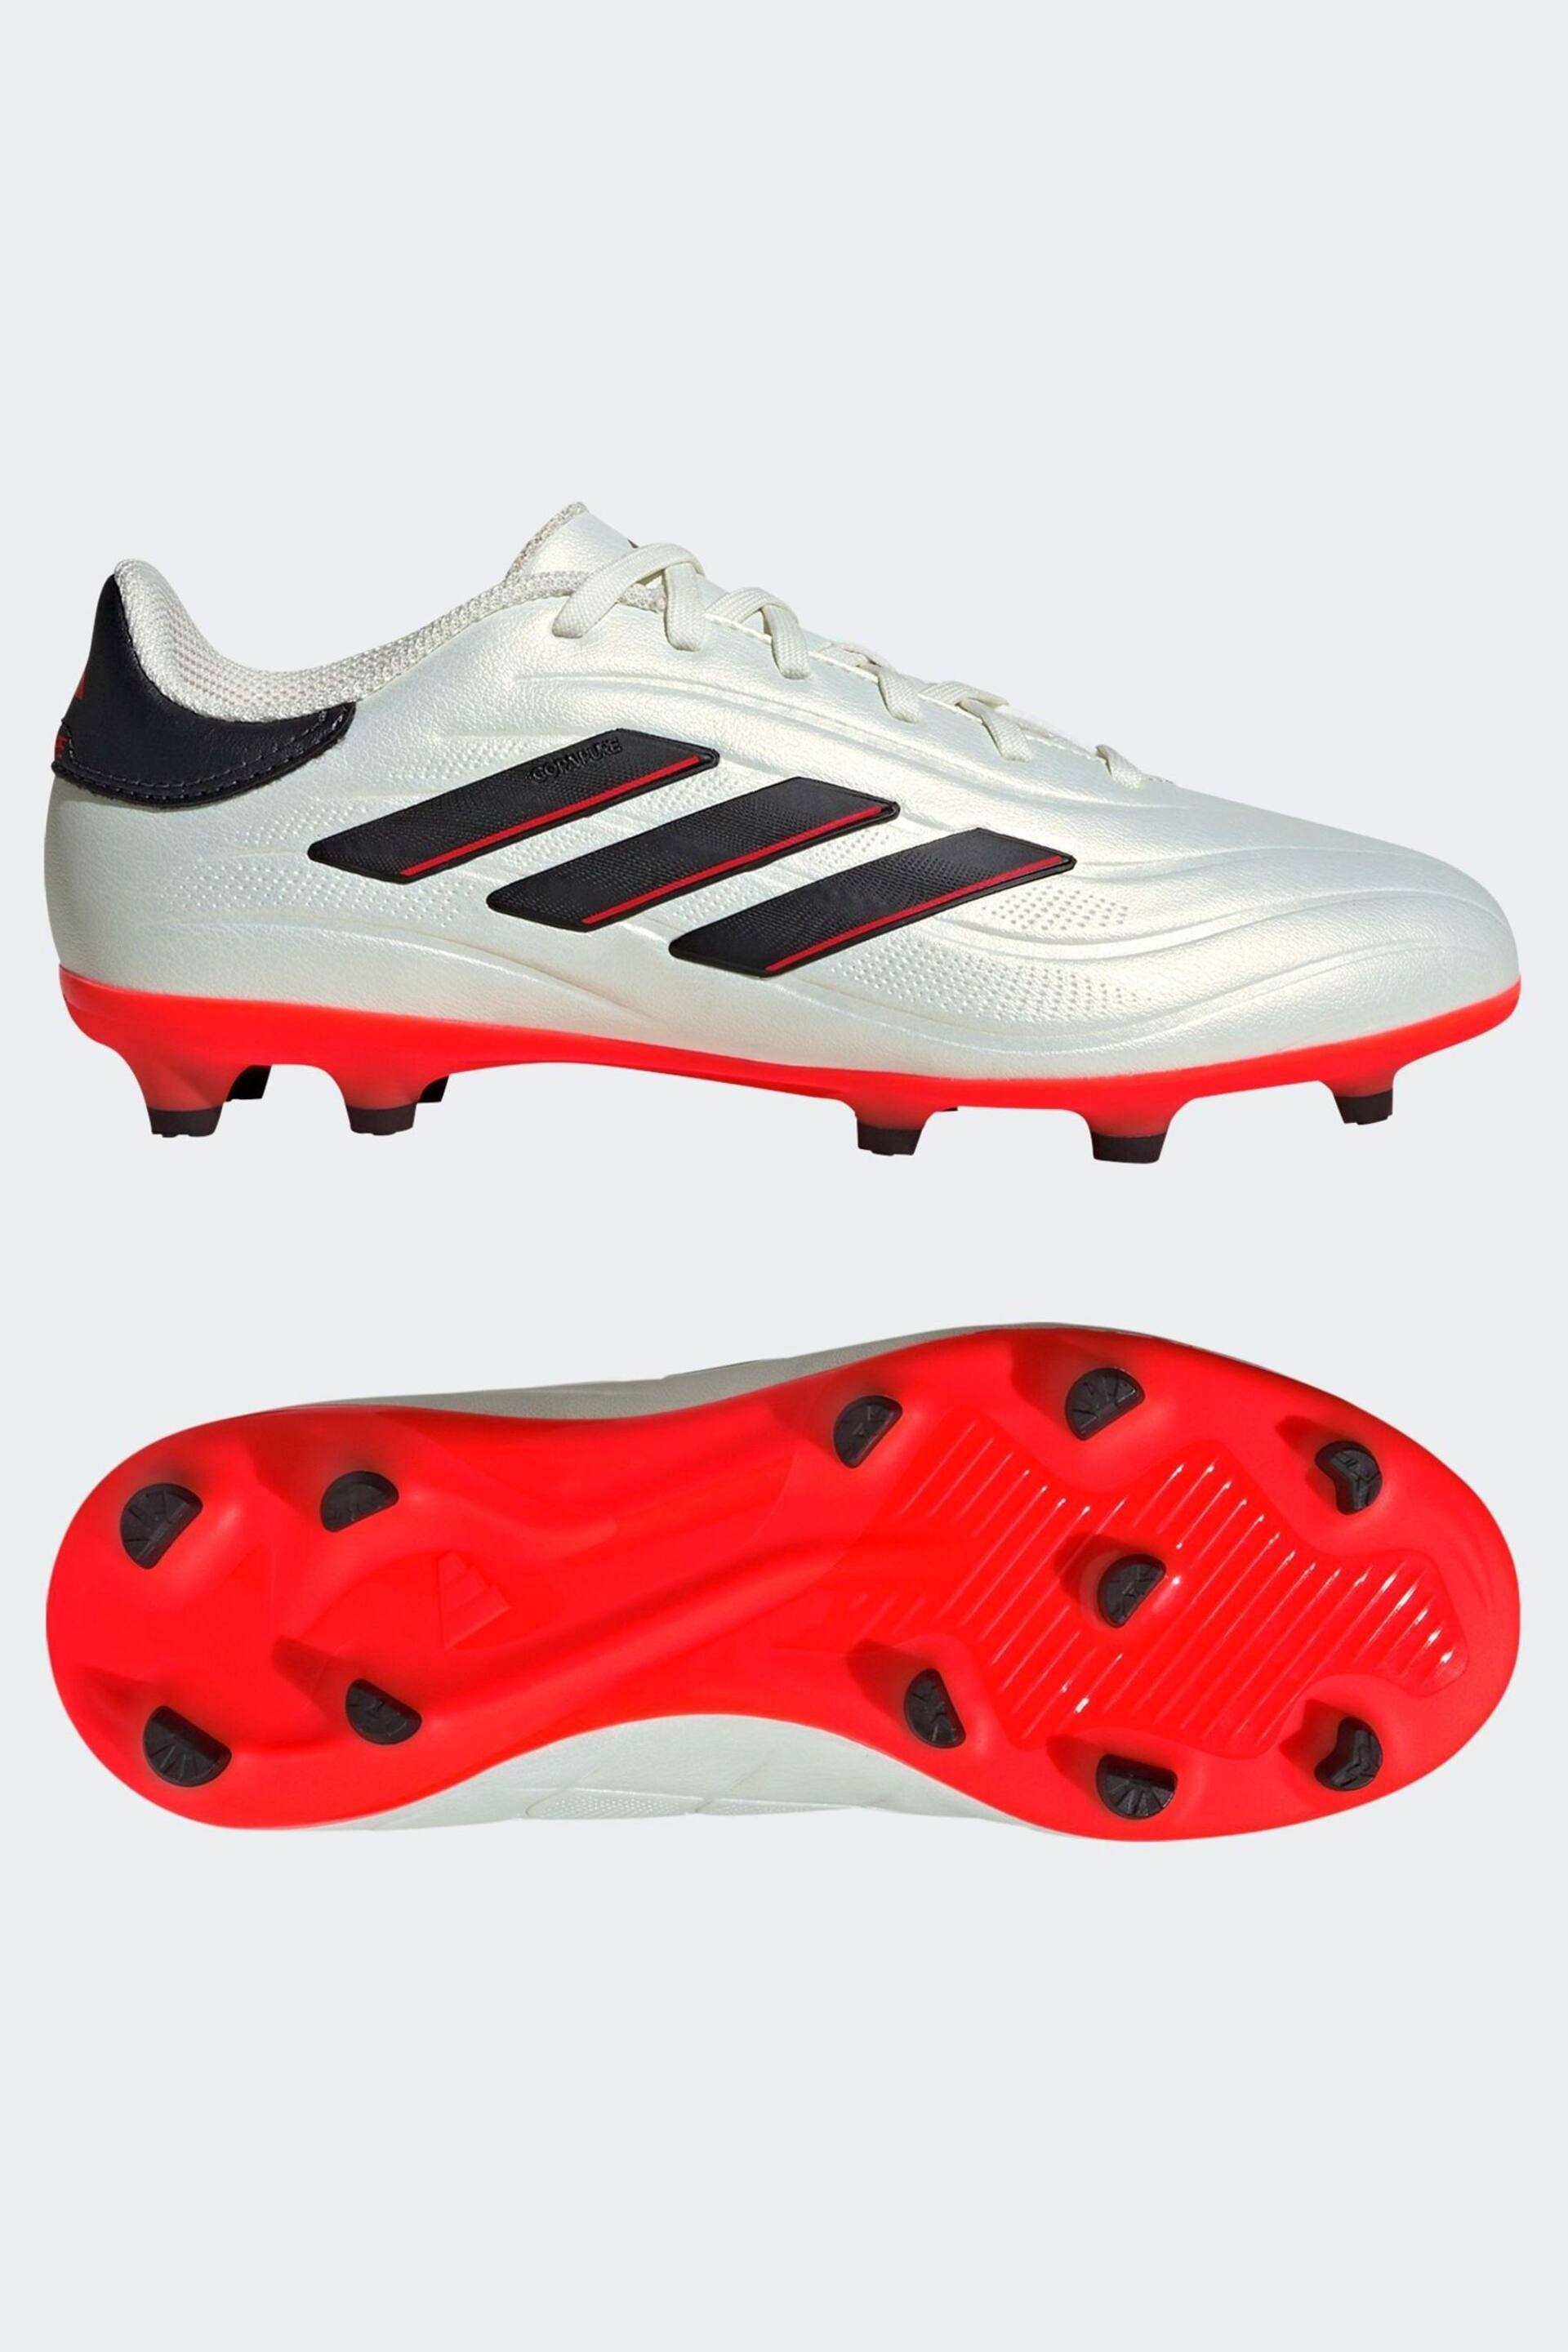 adidas Silver Football Copa Pure II League Firm Ground Kids Boots - Image 6 of 10